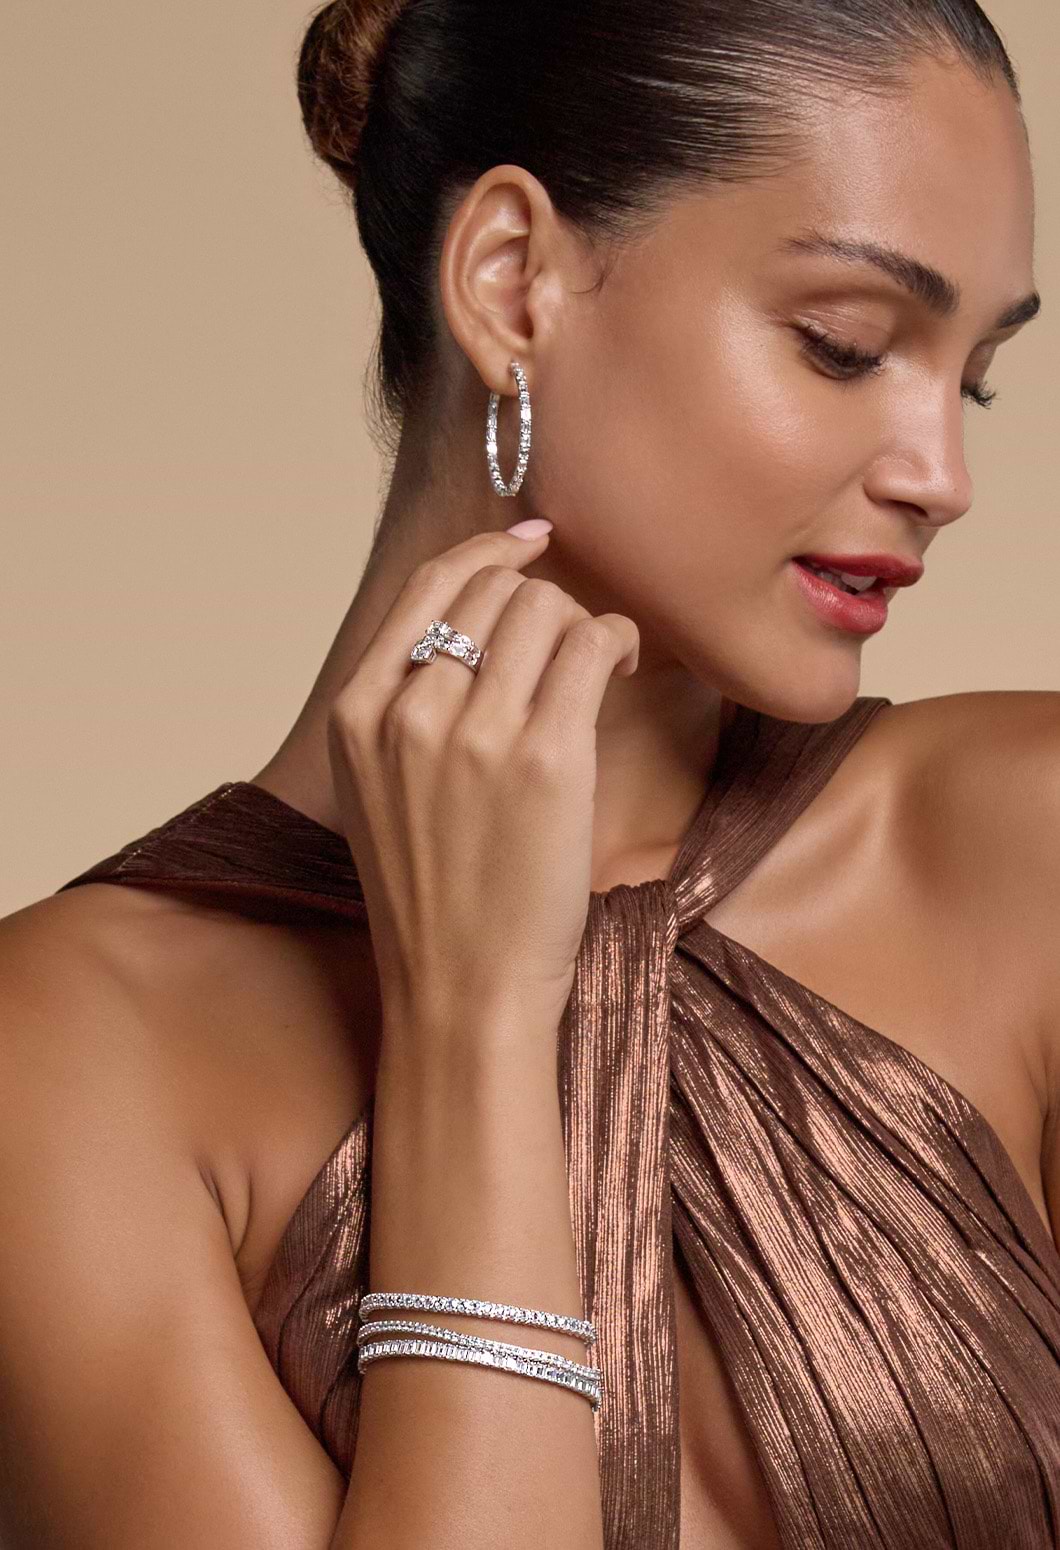 Image of a female model's side profile with three tennis bracelets on her right hand, one fashion ring and diamond hoops